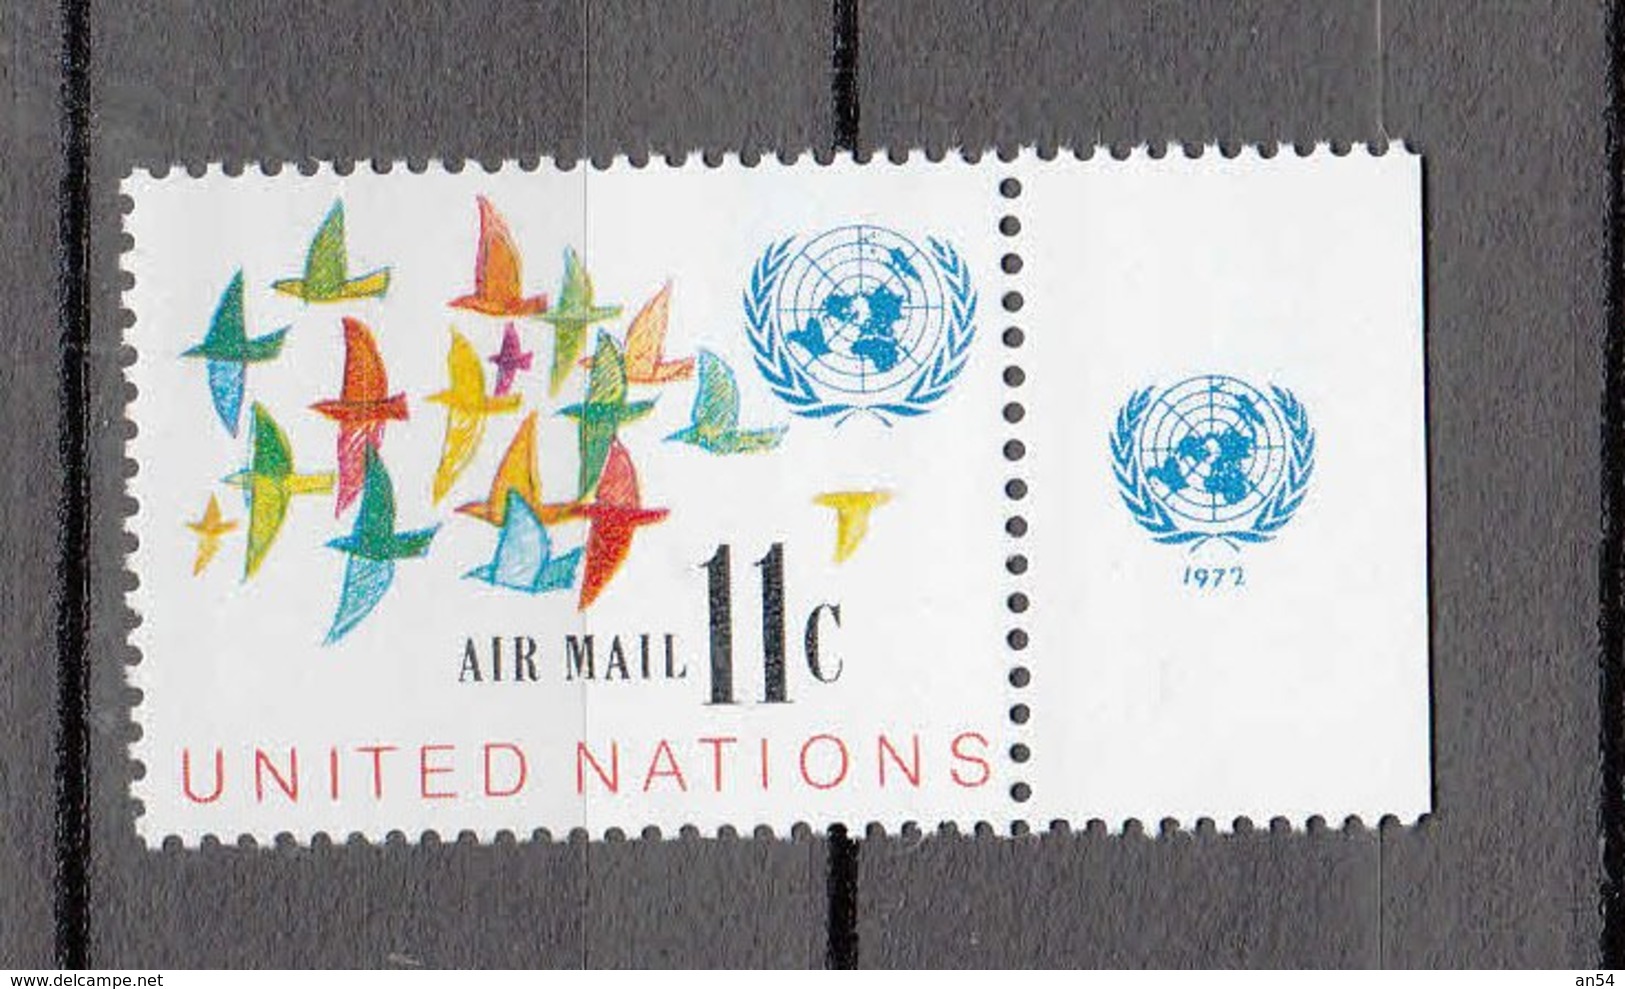 NATIONS  UNIES  NEW-YORK    1972  PA     N° 16     NEUF**   CATALOGUE YVERT&TELLIER - Airmail